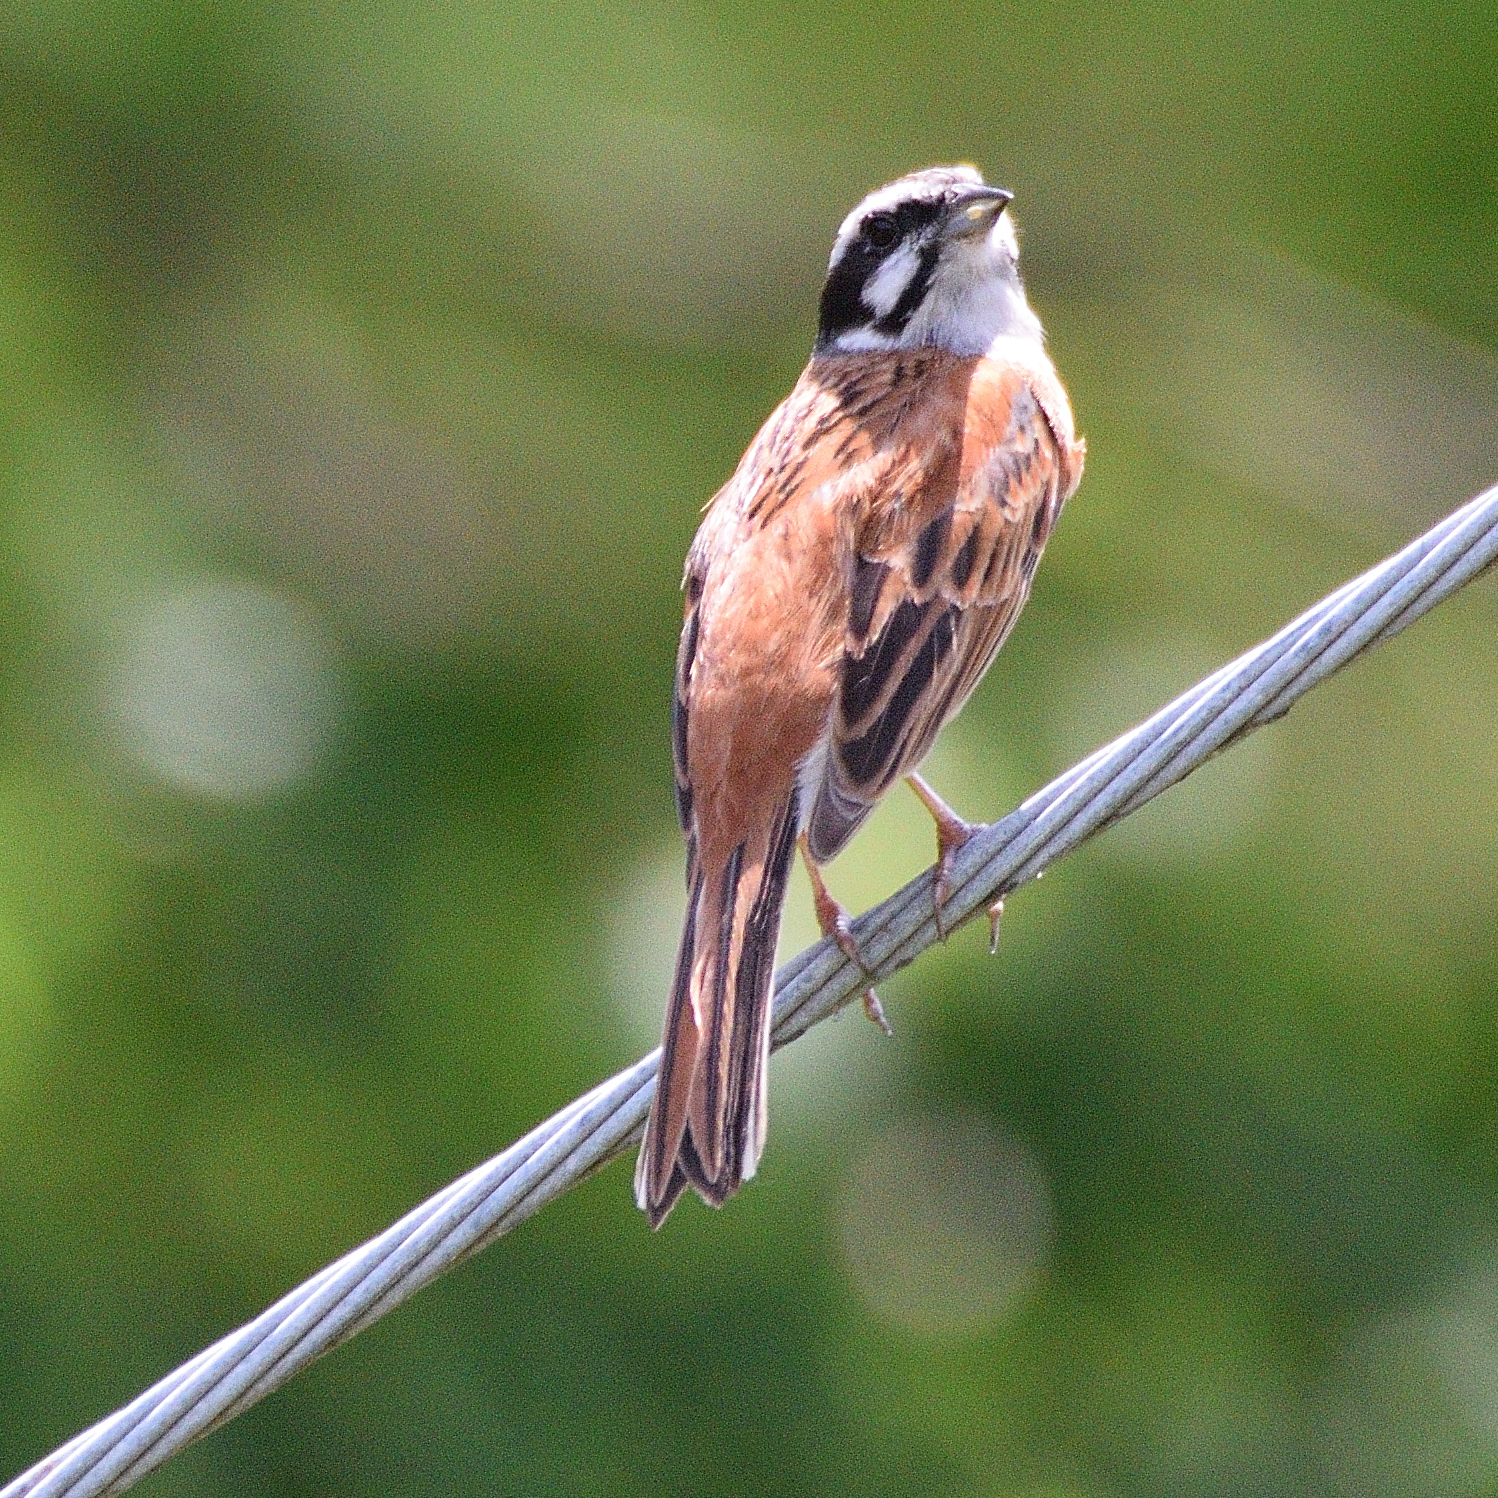 Photo of Meadow Bunting at 福岡県古賀市薦野大根川 by poyon ぽよん